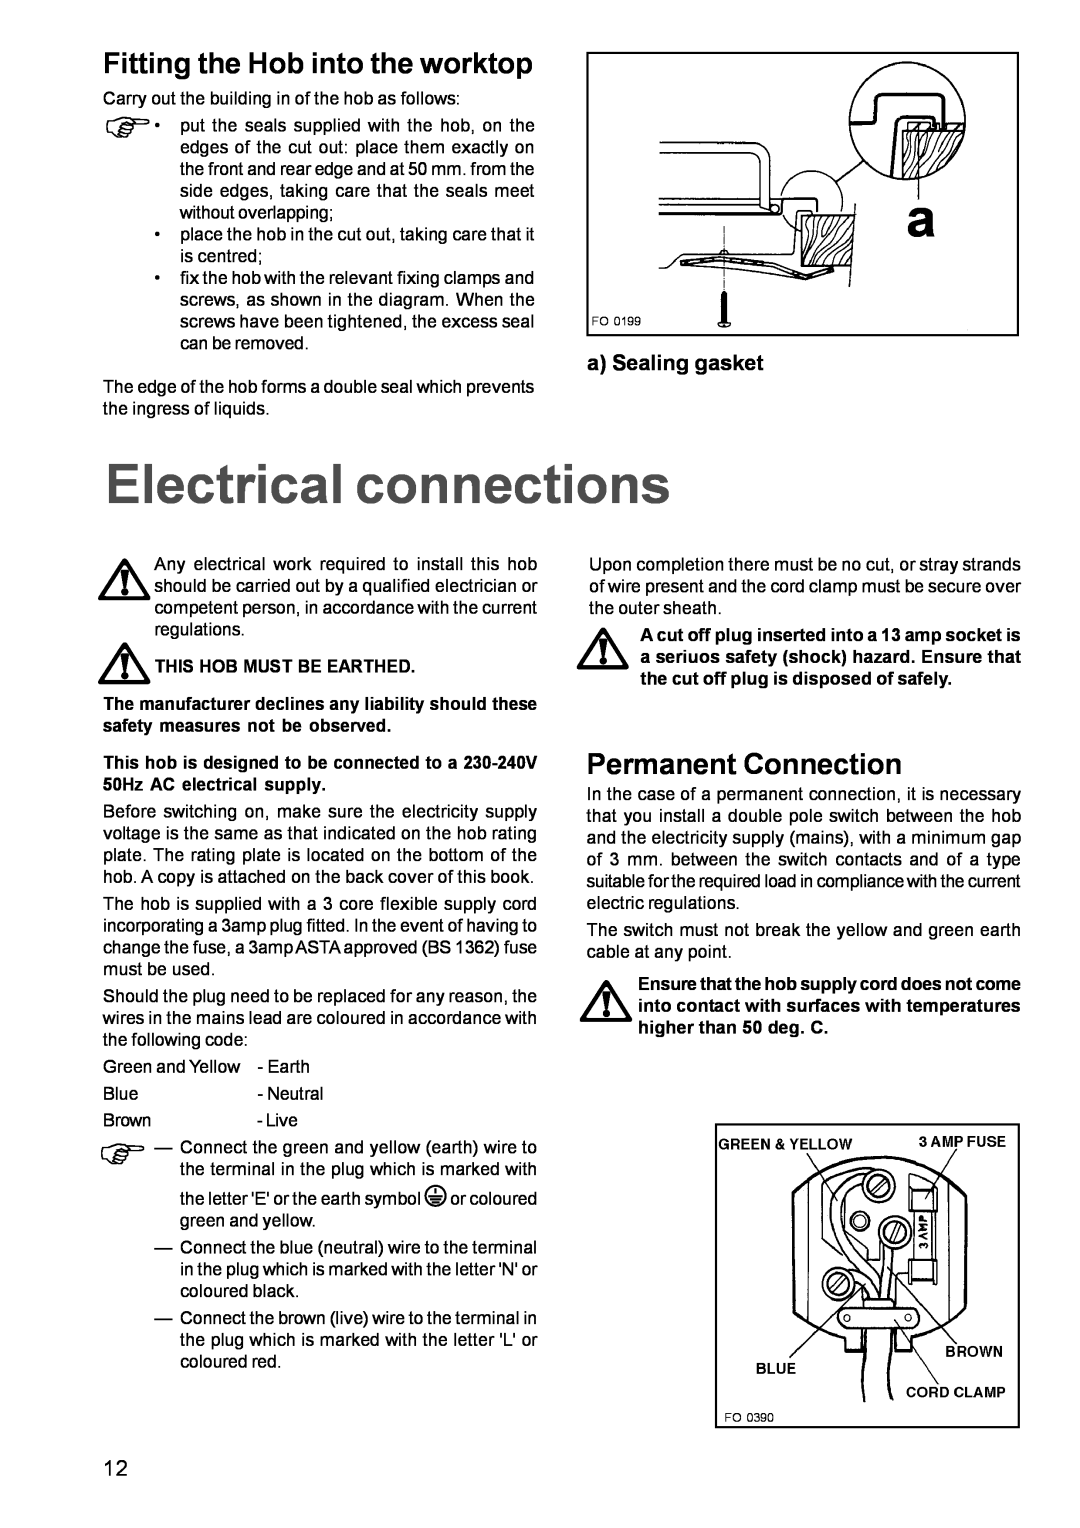 Zanussi GAS HOB manual Electrical connections, Fitting the Hob into the worktop, Permanent Connection, a Sealing gasket 